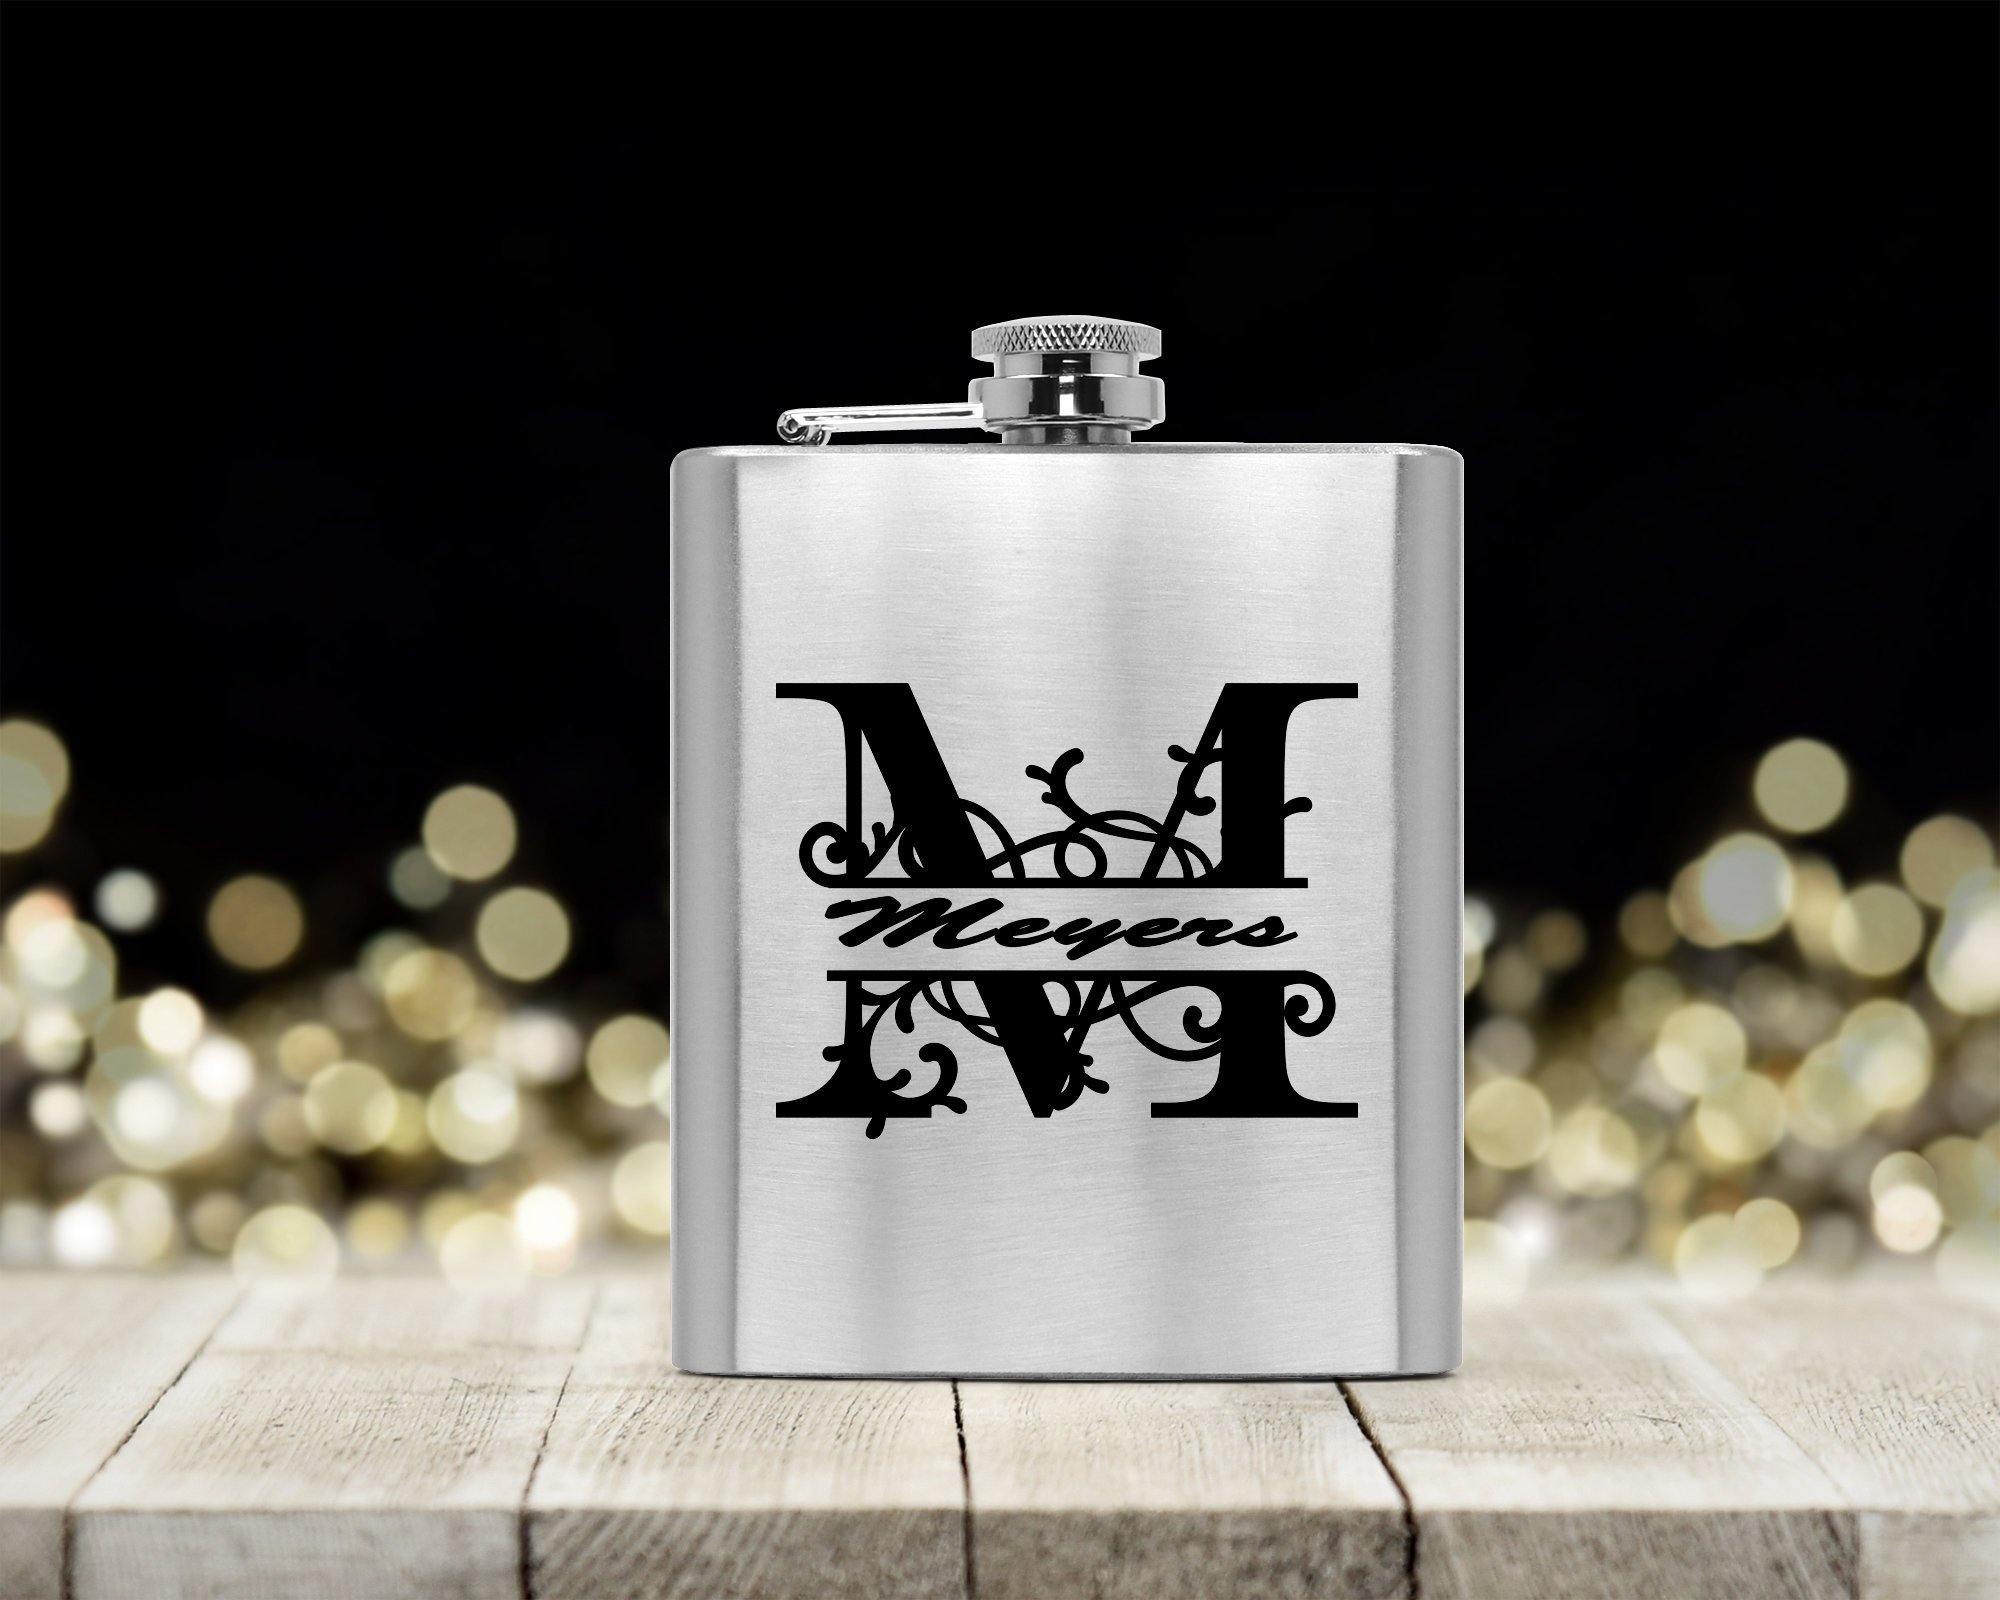 Personalized Flasks | Custom Wedding Gifts | Monogram Gifts - This & That Solutions - Personalized Flasks | Custom Wedding Gifts | Monogram Gifts - Personalized Gifts & Custom Home Decor